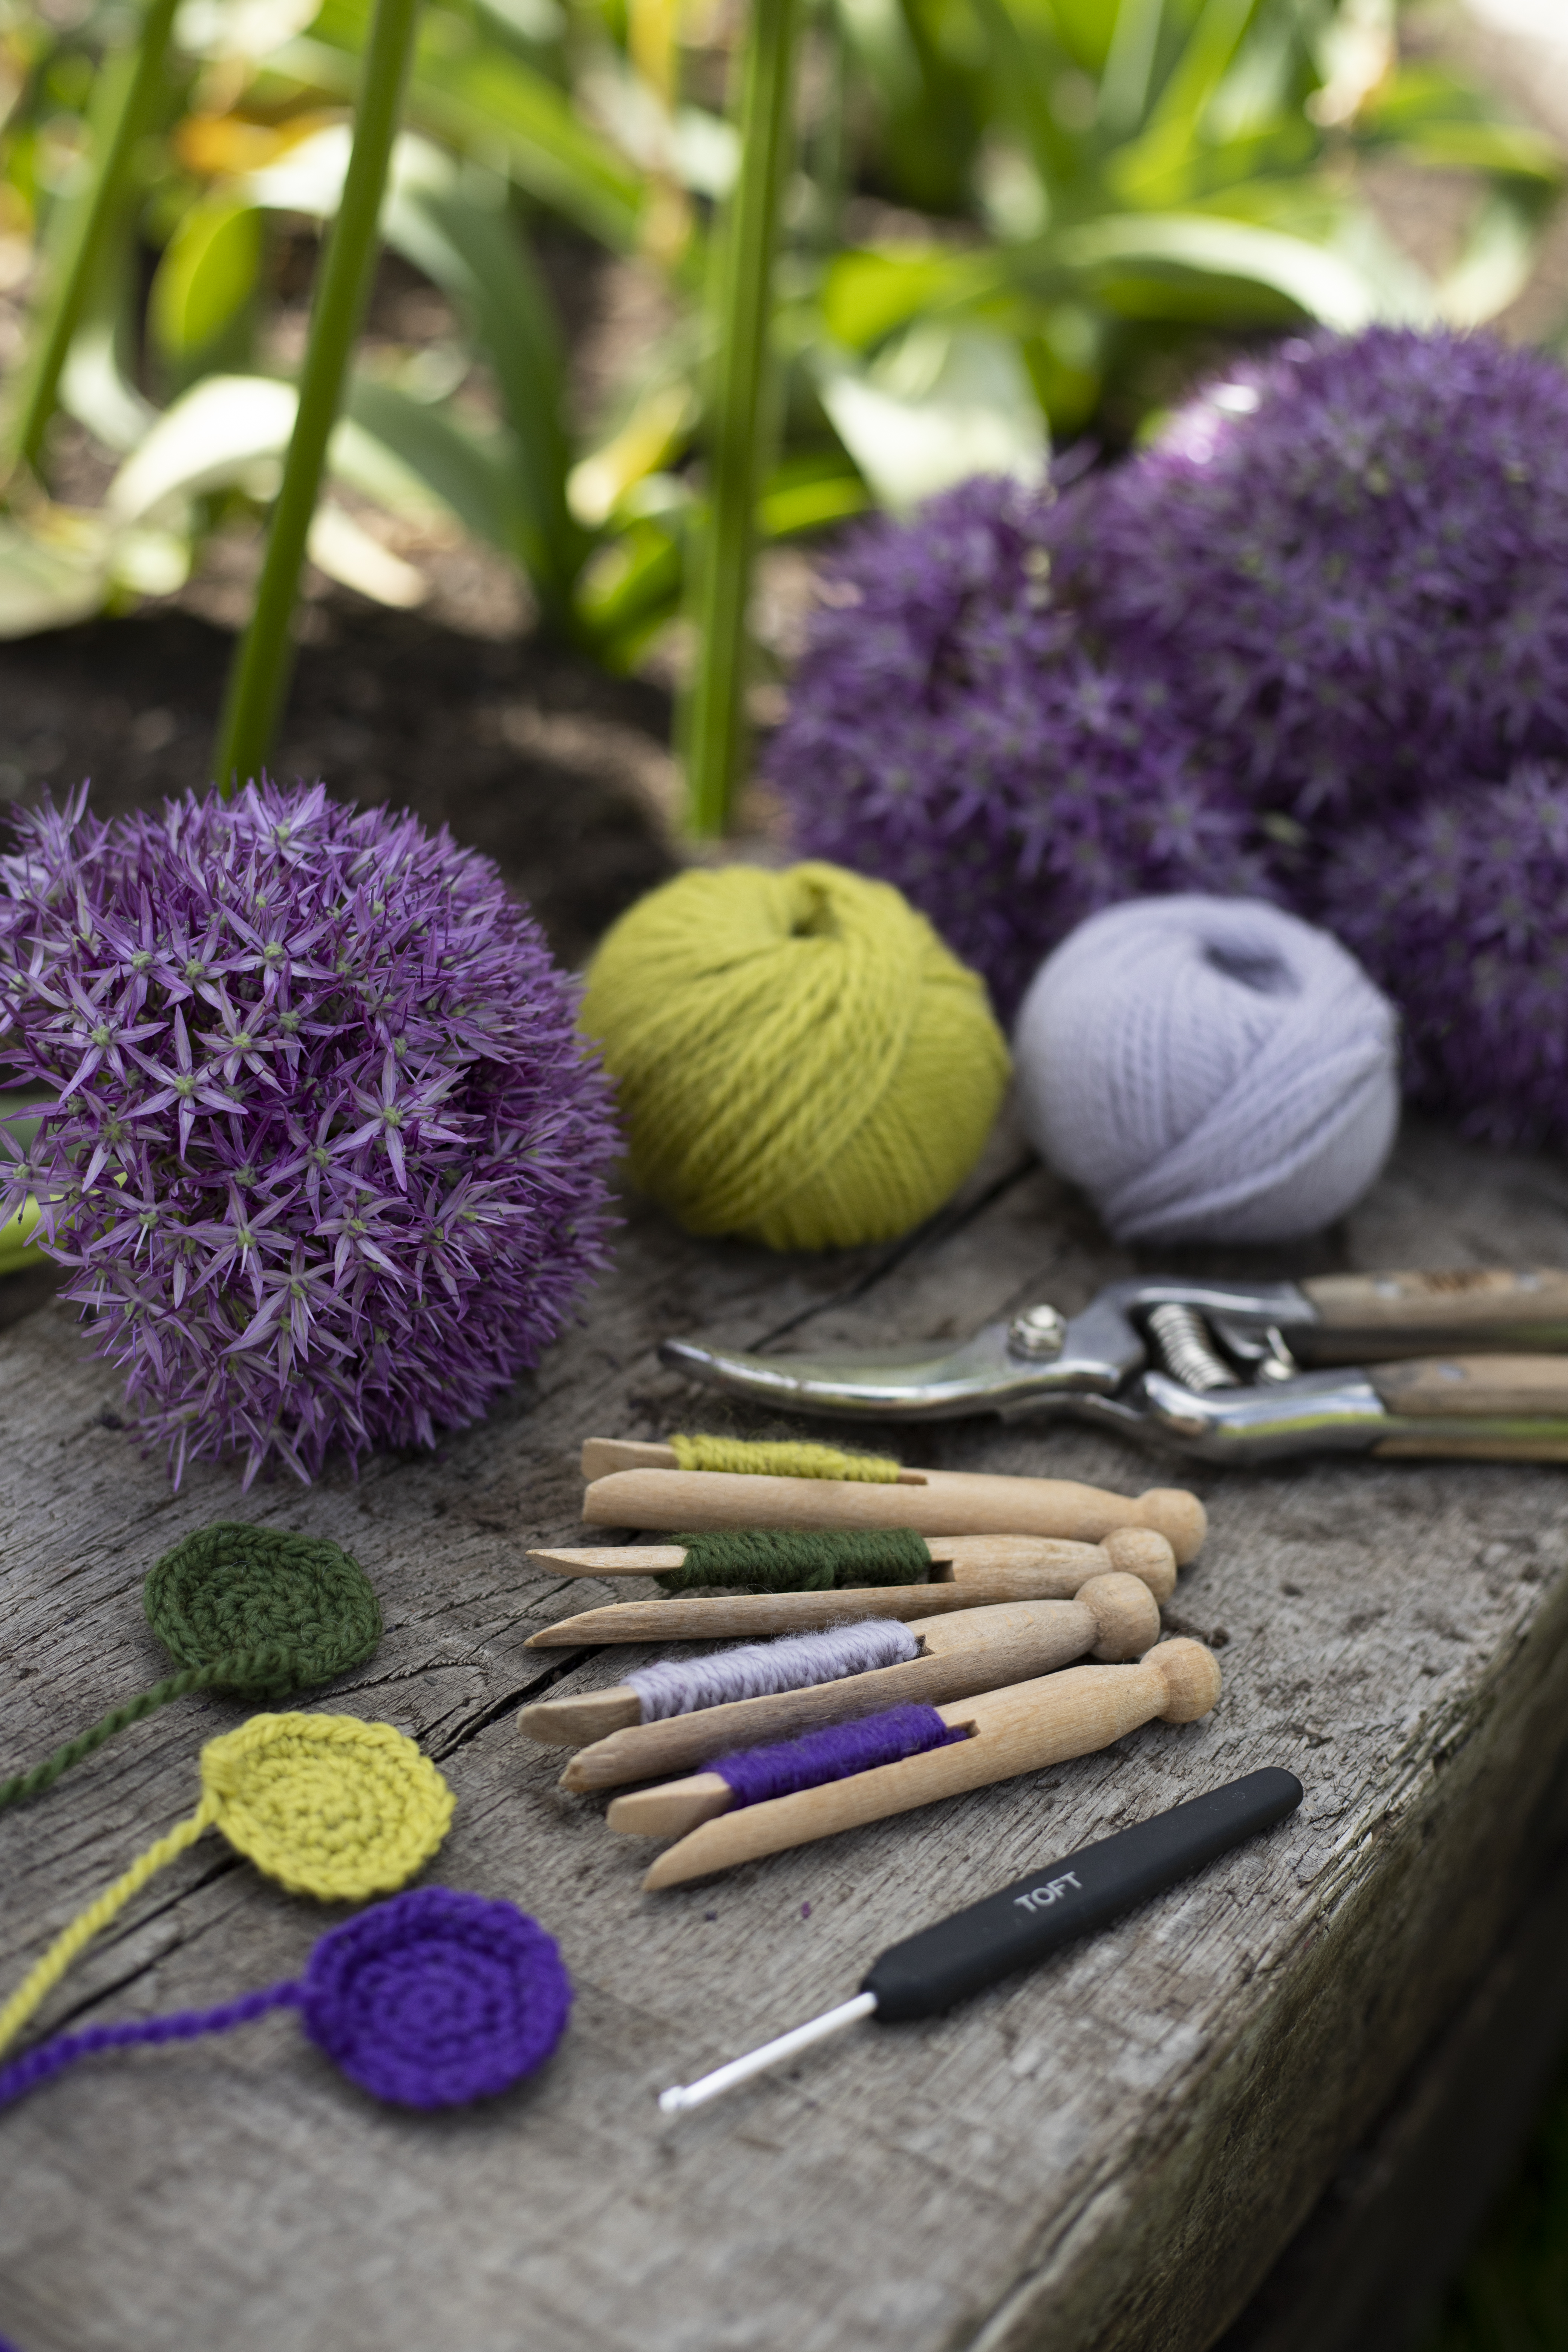 A collection of crochet equipment including coloured wool and hooks